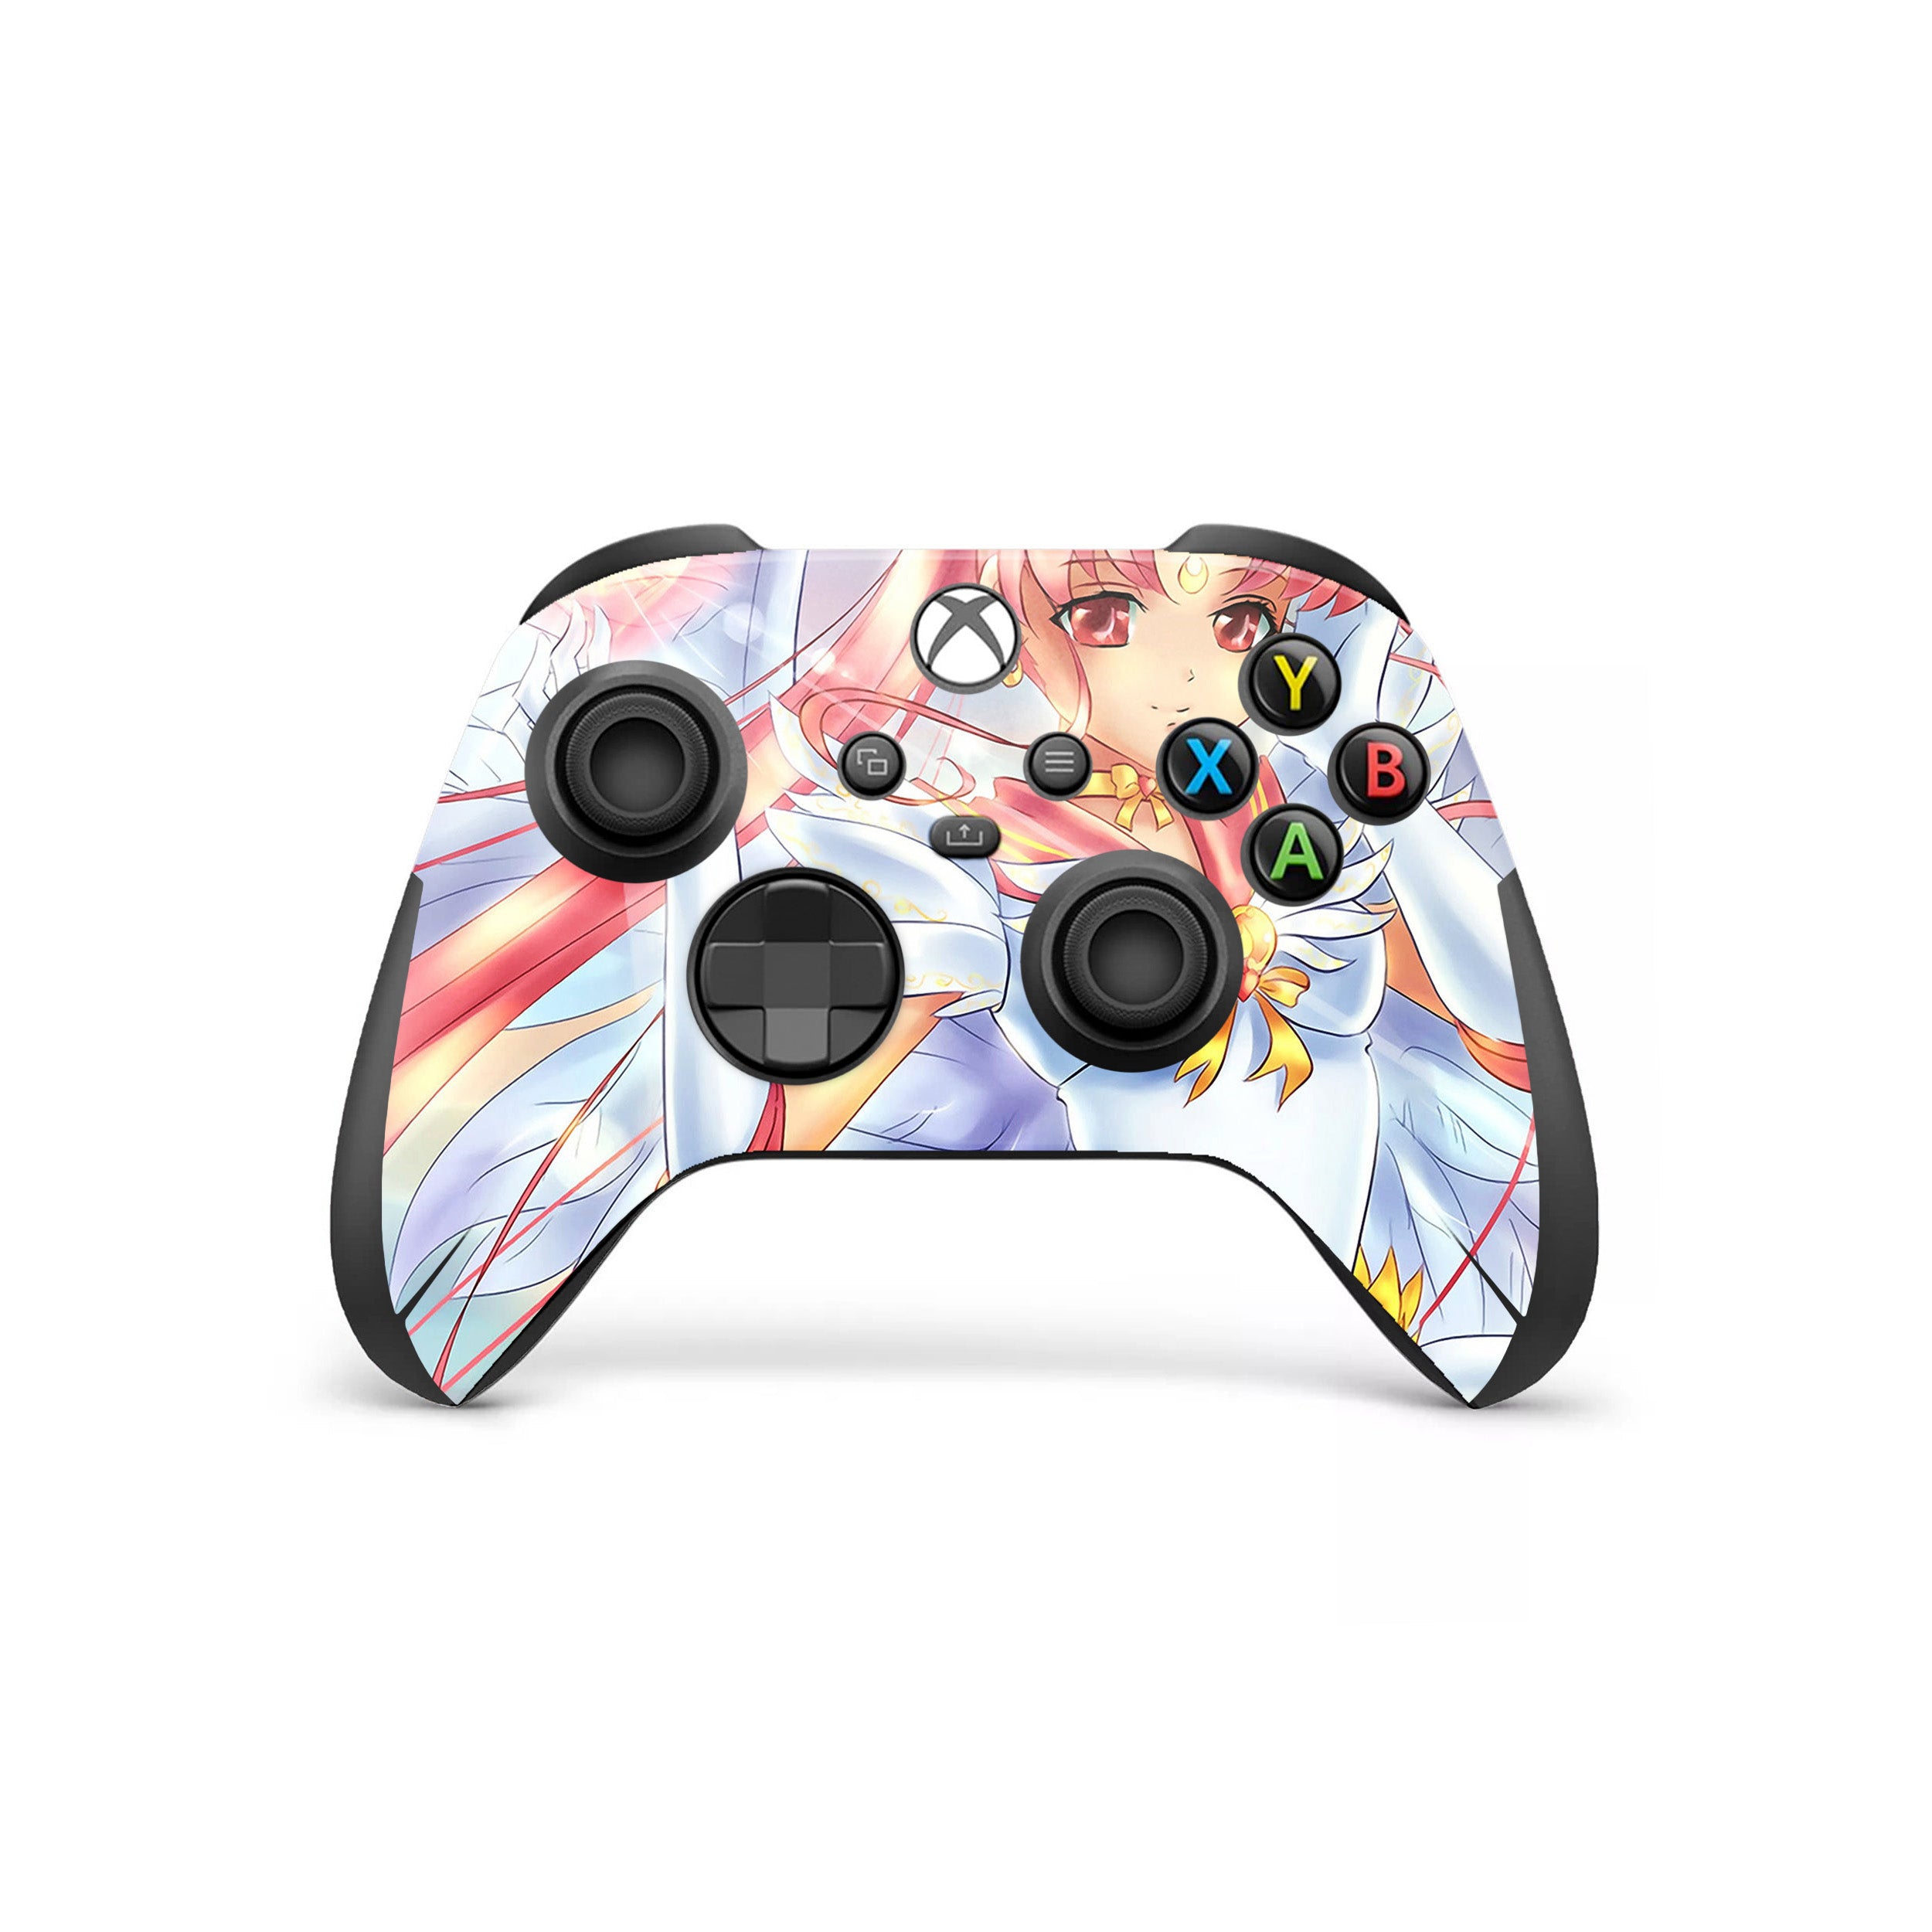 A video game skin featuring a Sailor Moon design for the Xbox Wireless Controller.